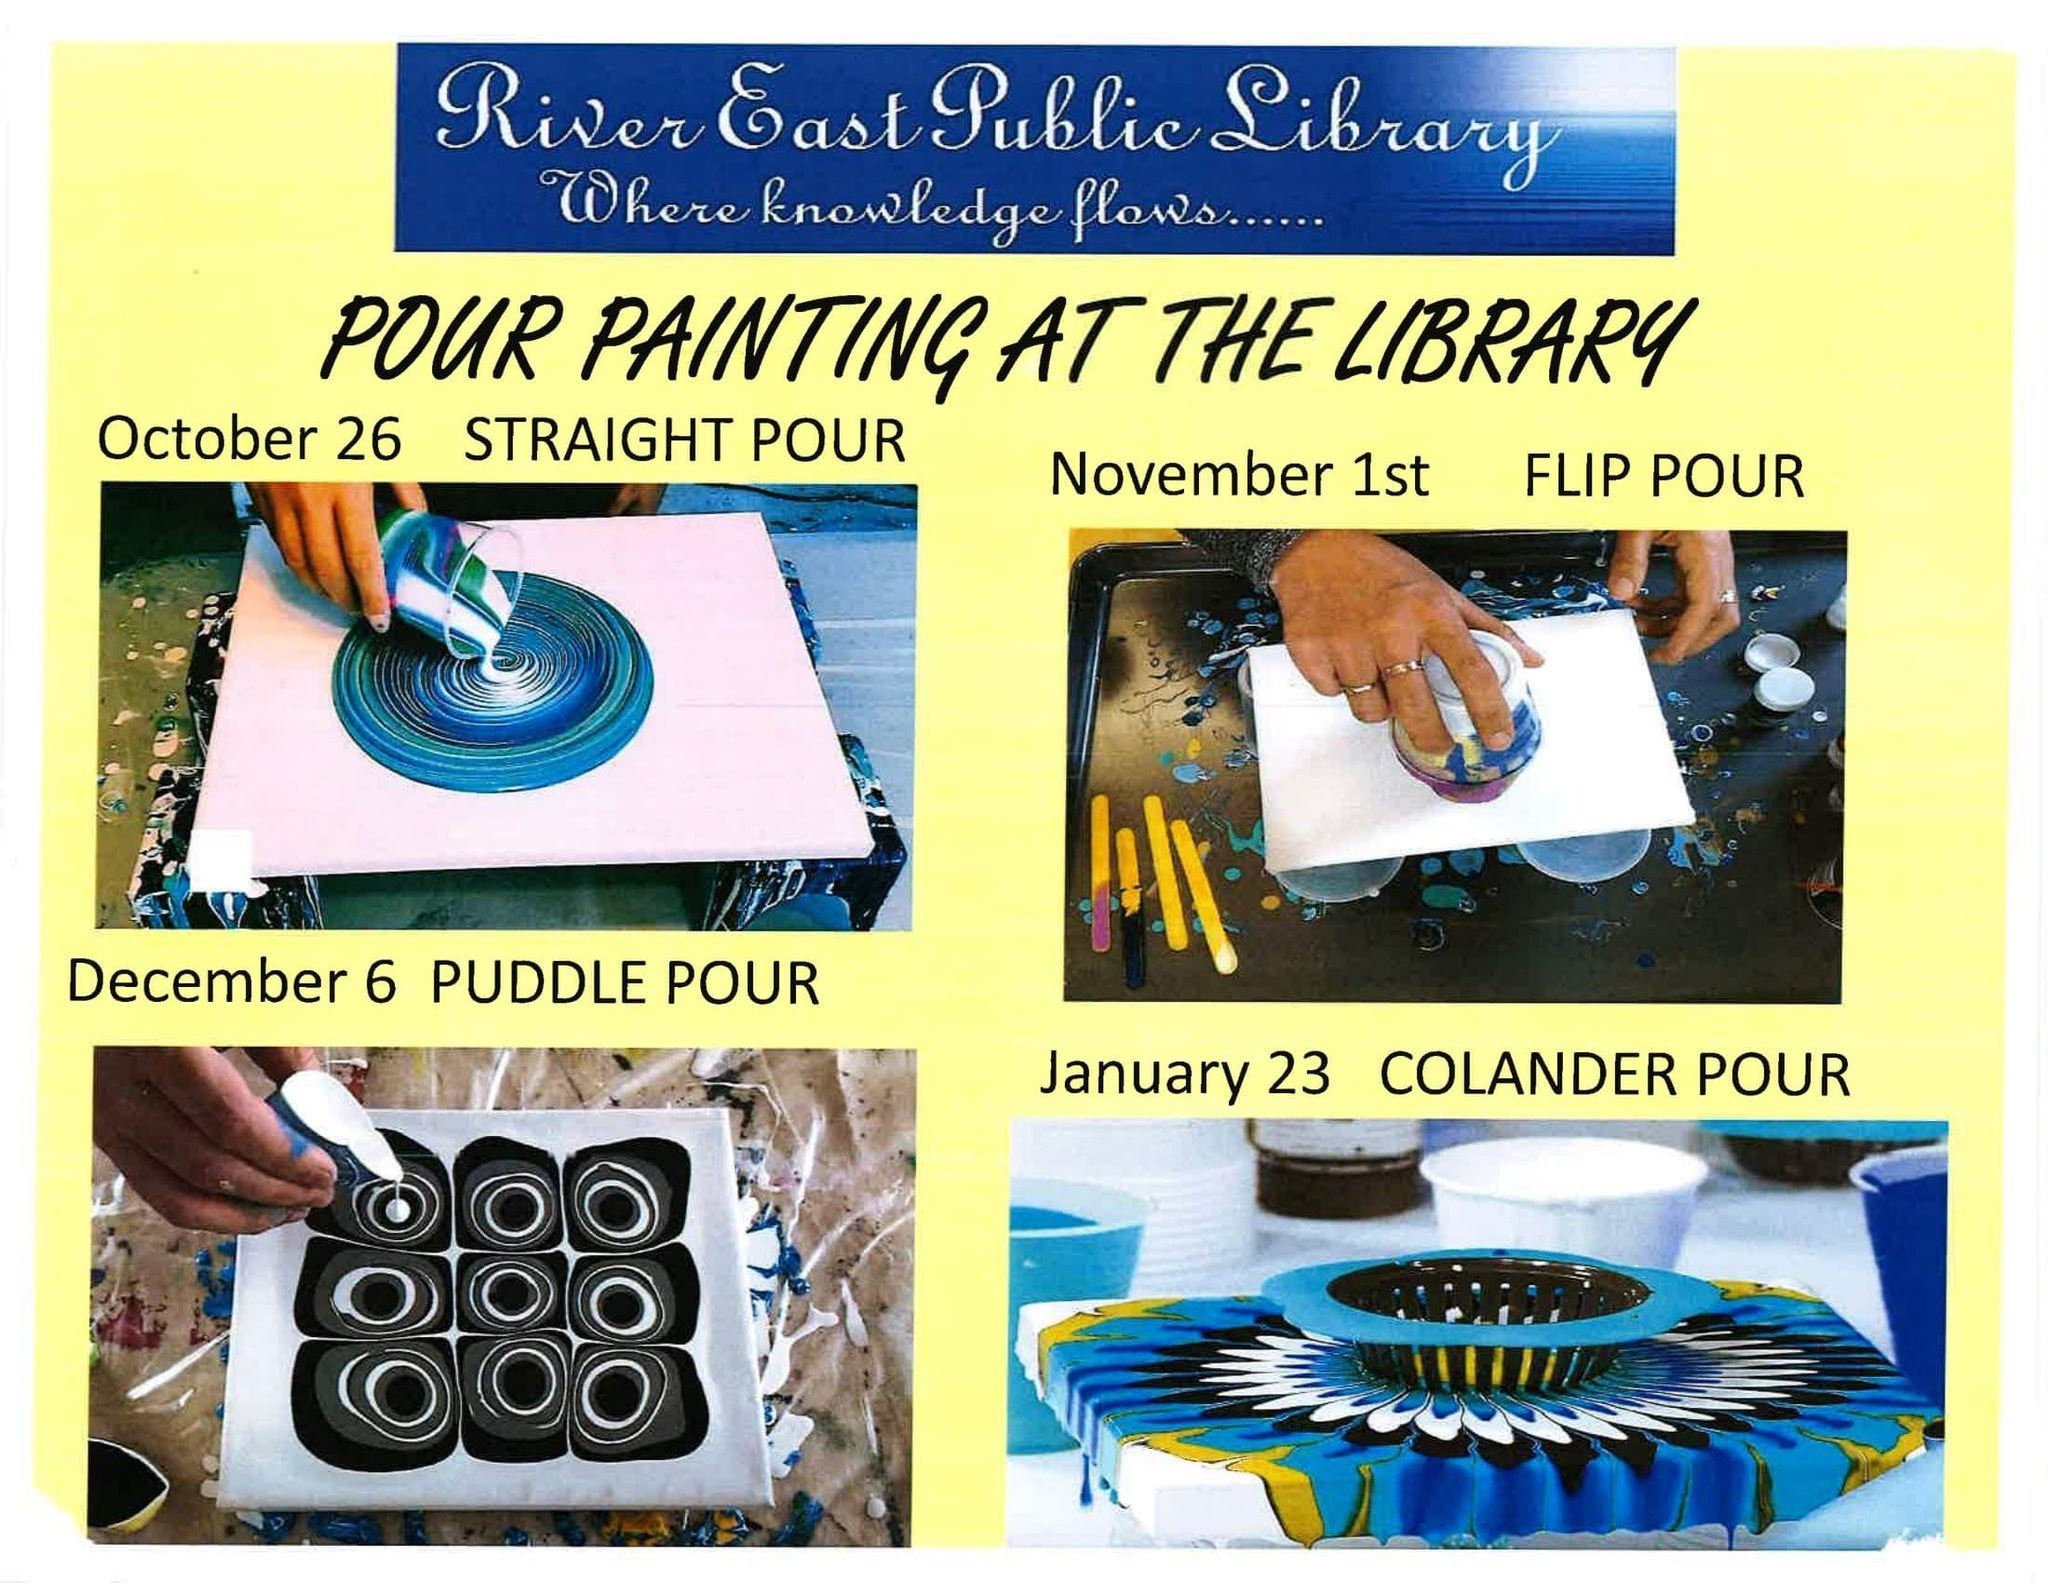 Poster advertising our upcoming paint pour classes